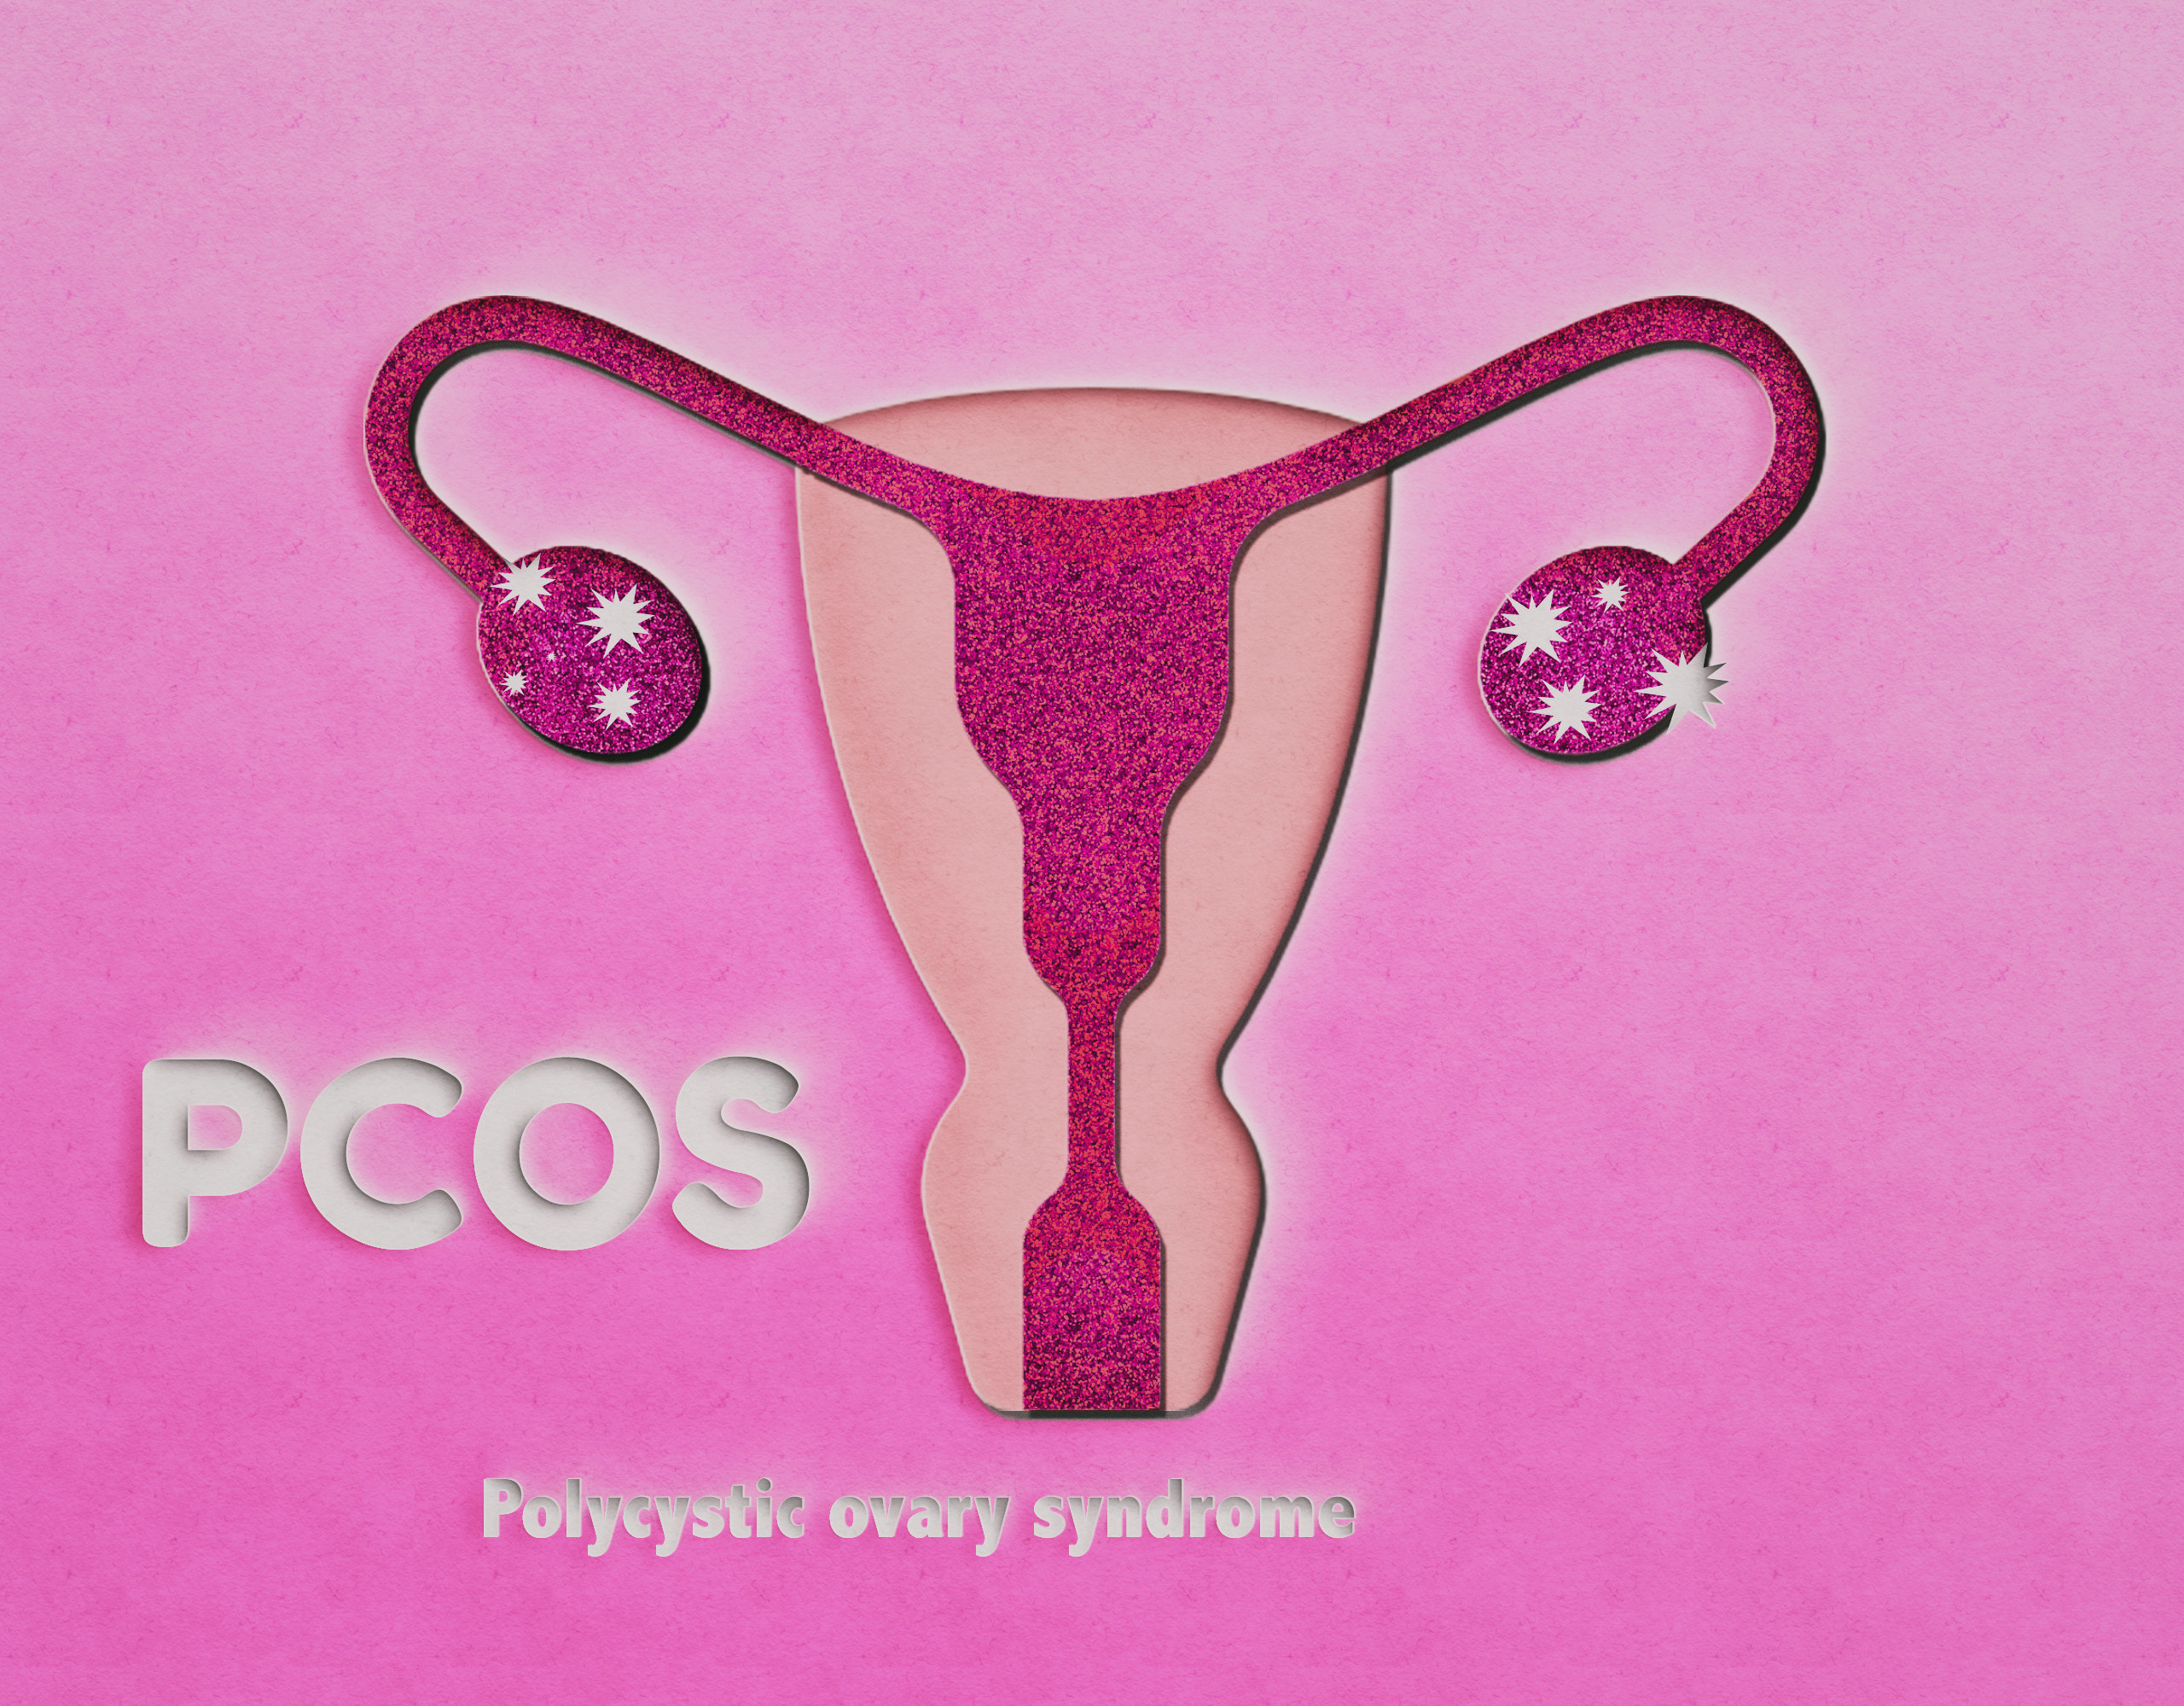 A drawing of the uterus with PCOS